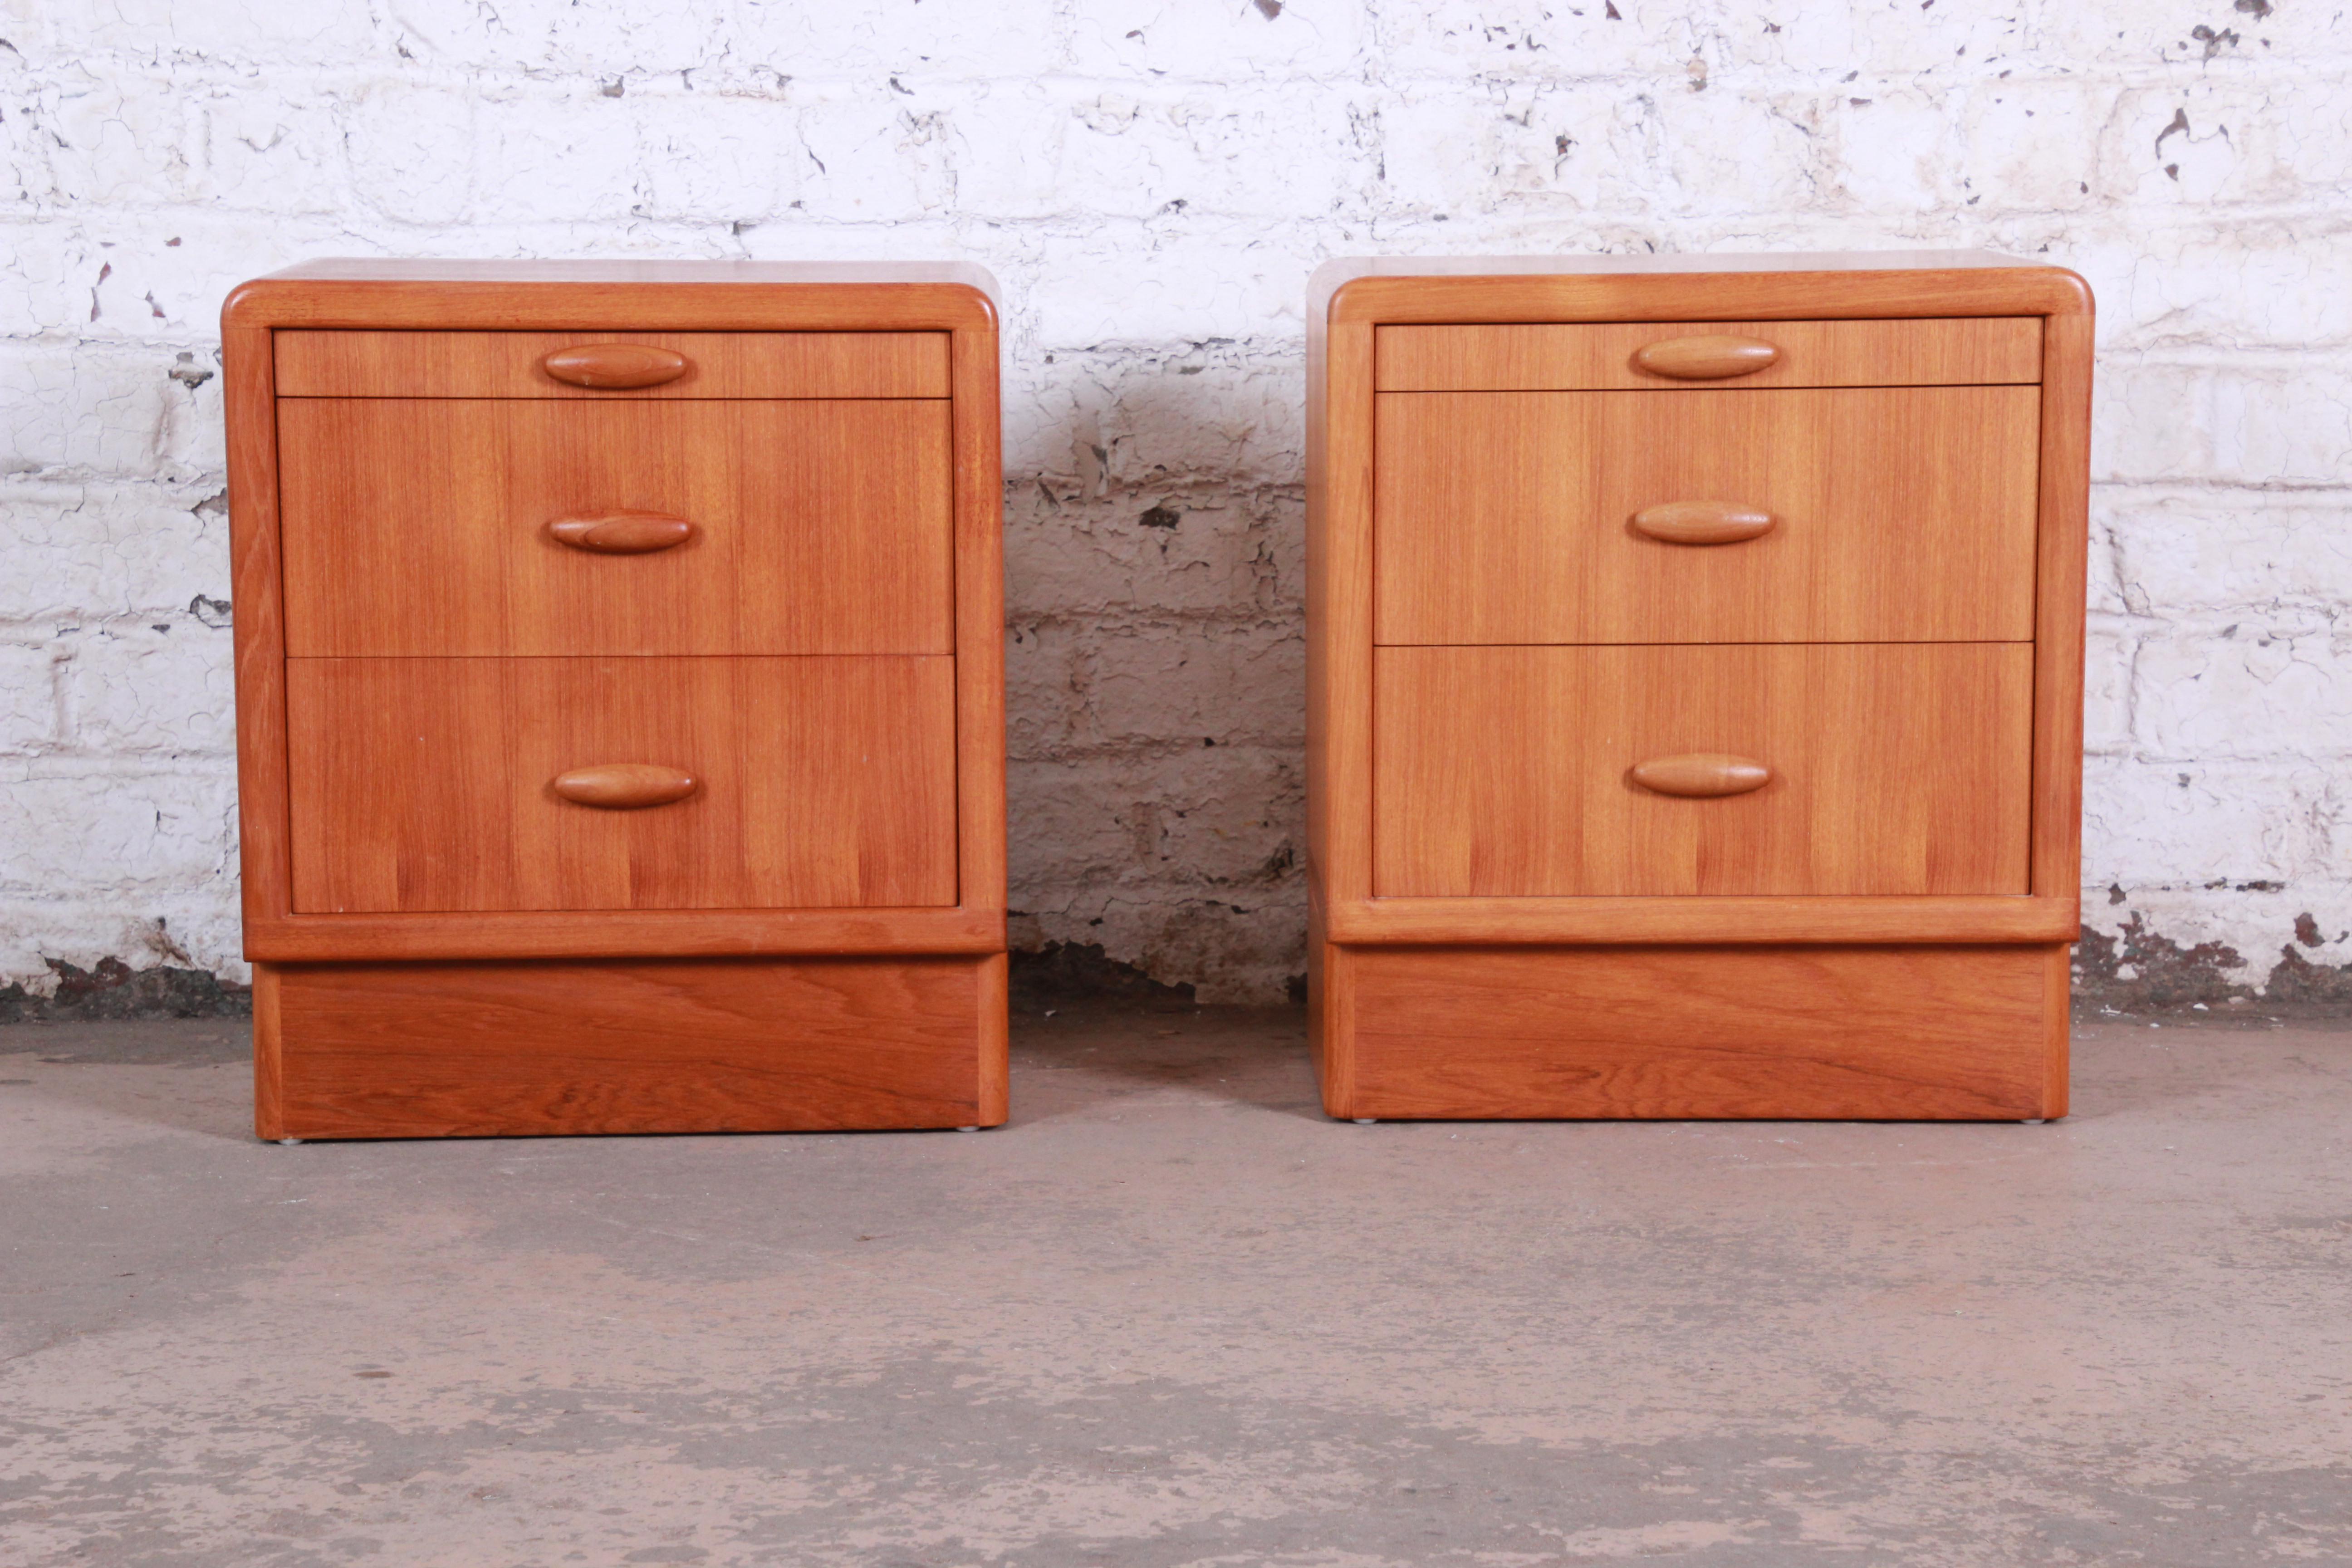 A gorgeous pair of Danish modern teak nightstands by Dyrlund. The nightstands feature stunning teak wood grain and sleek midcentury Danish design. The offer good storage, each with two drawers and a pull-out writing tablet. The sculpted solid teak